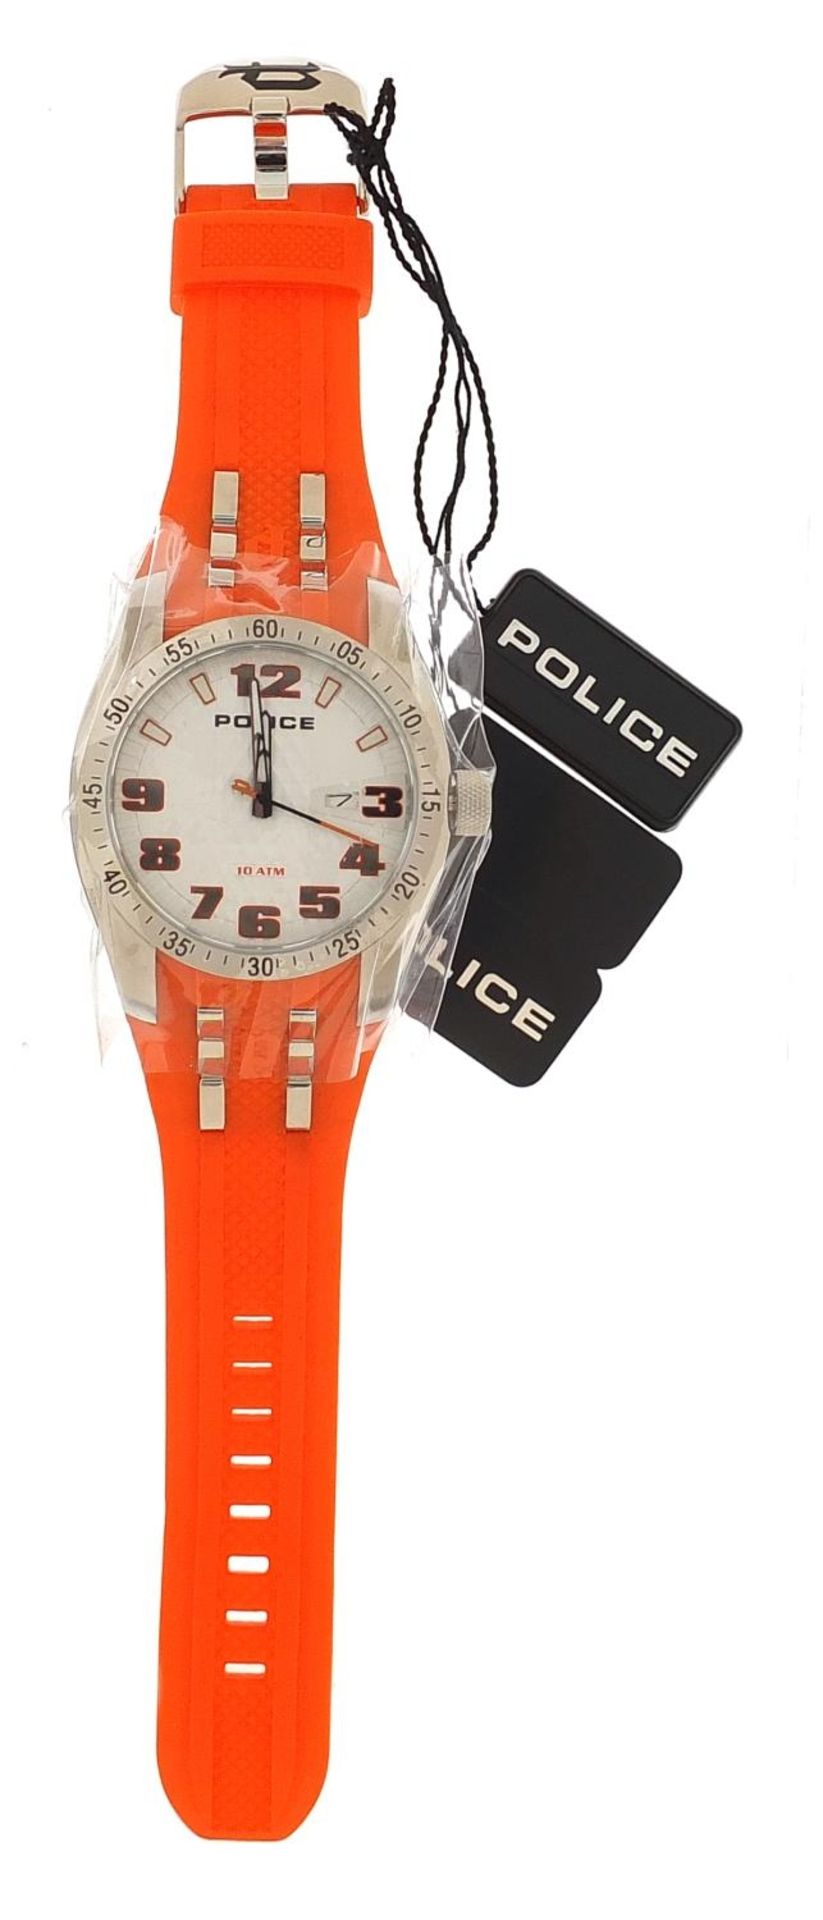 Police, as new gentlemen's wristwatch with box and paperwork, 43mm in diameter - Image 2 of 6